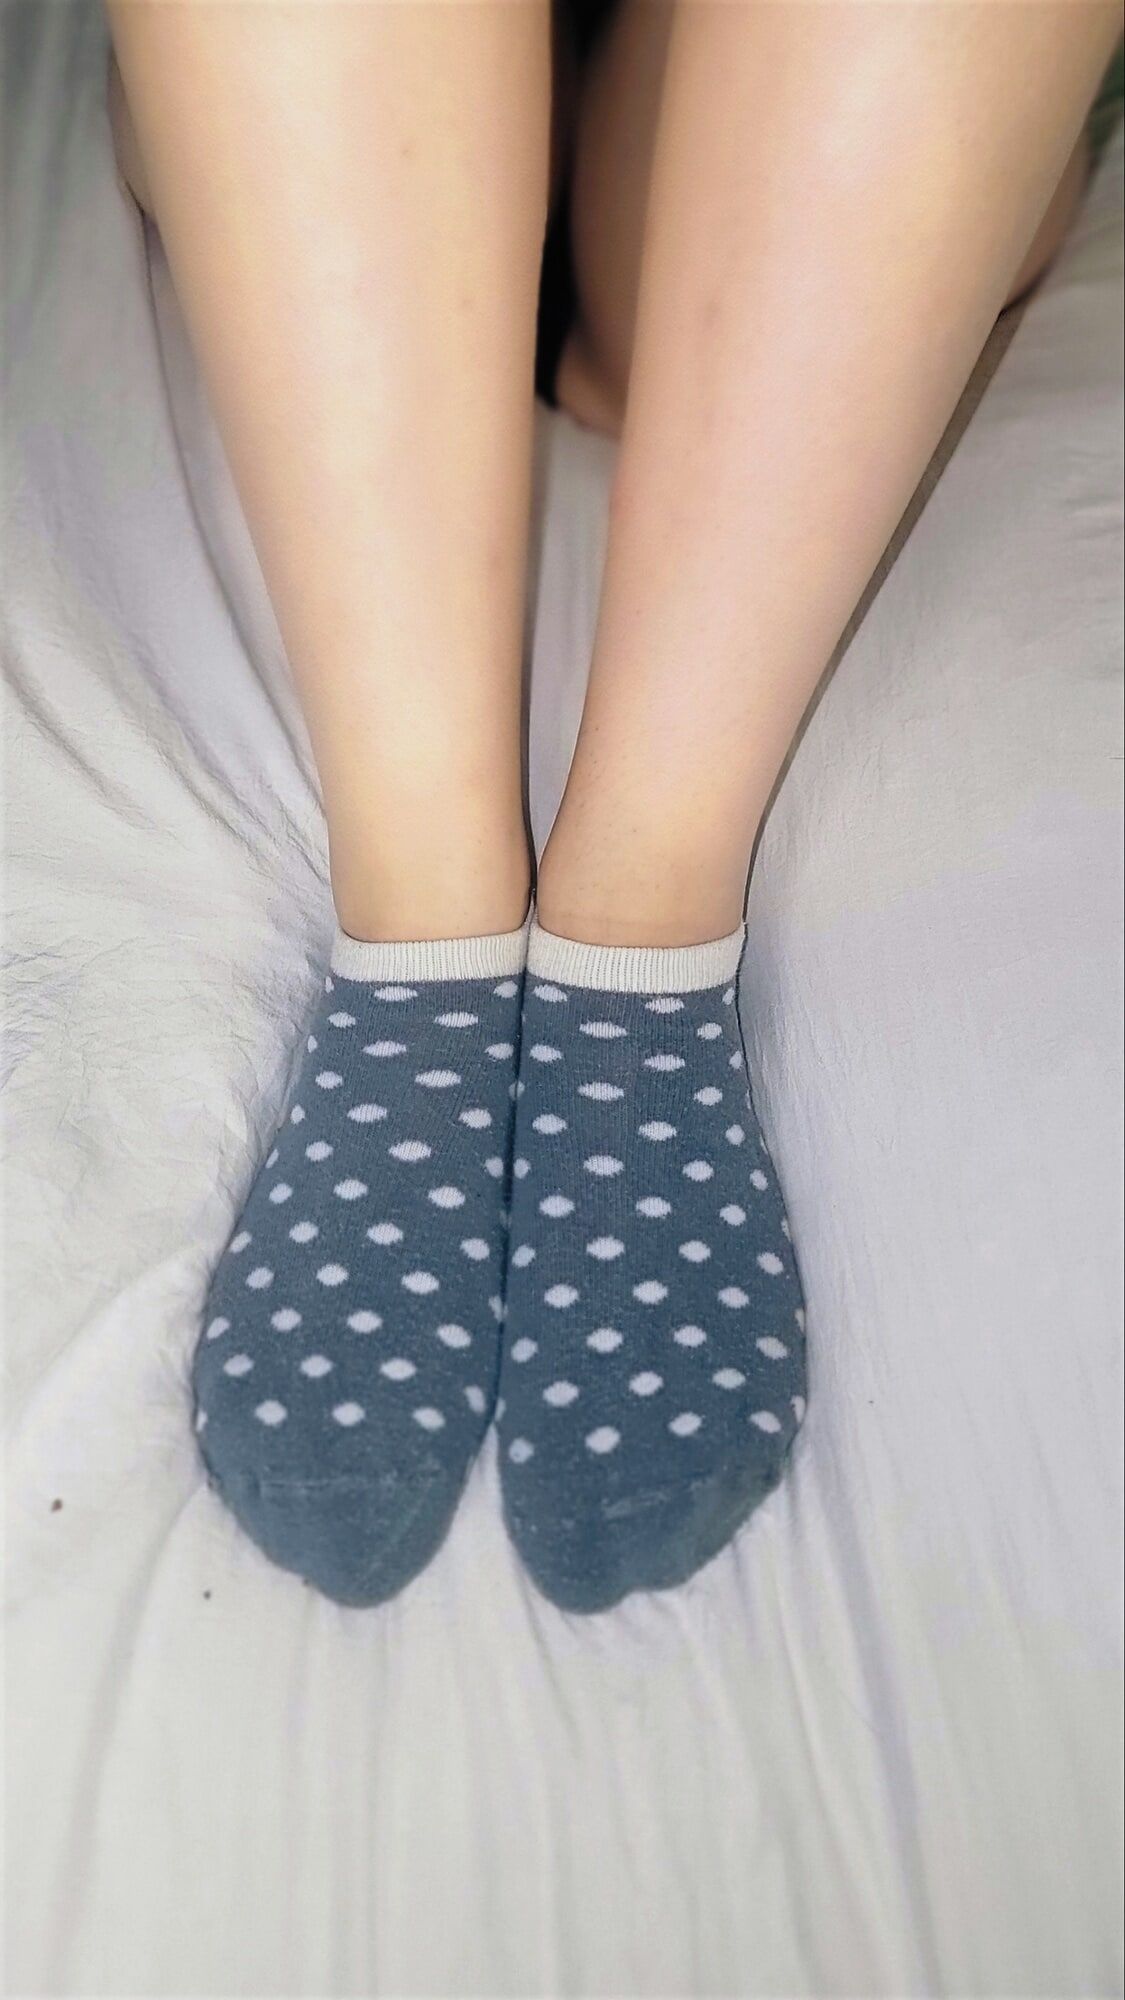 Feet Collection #5